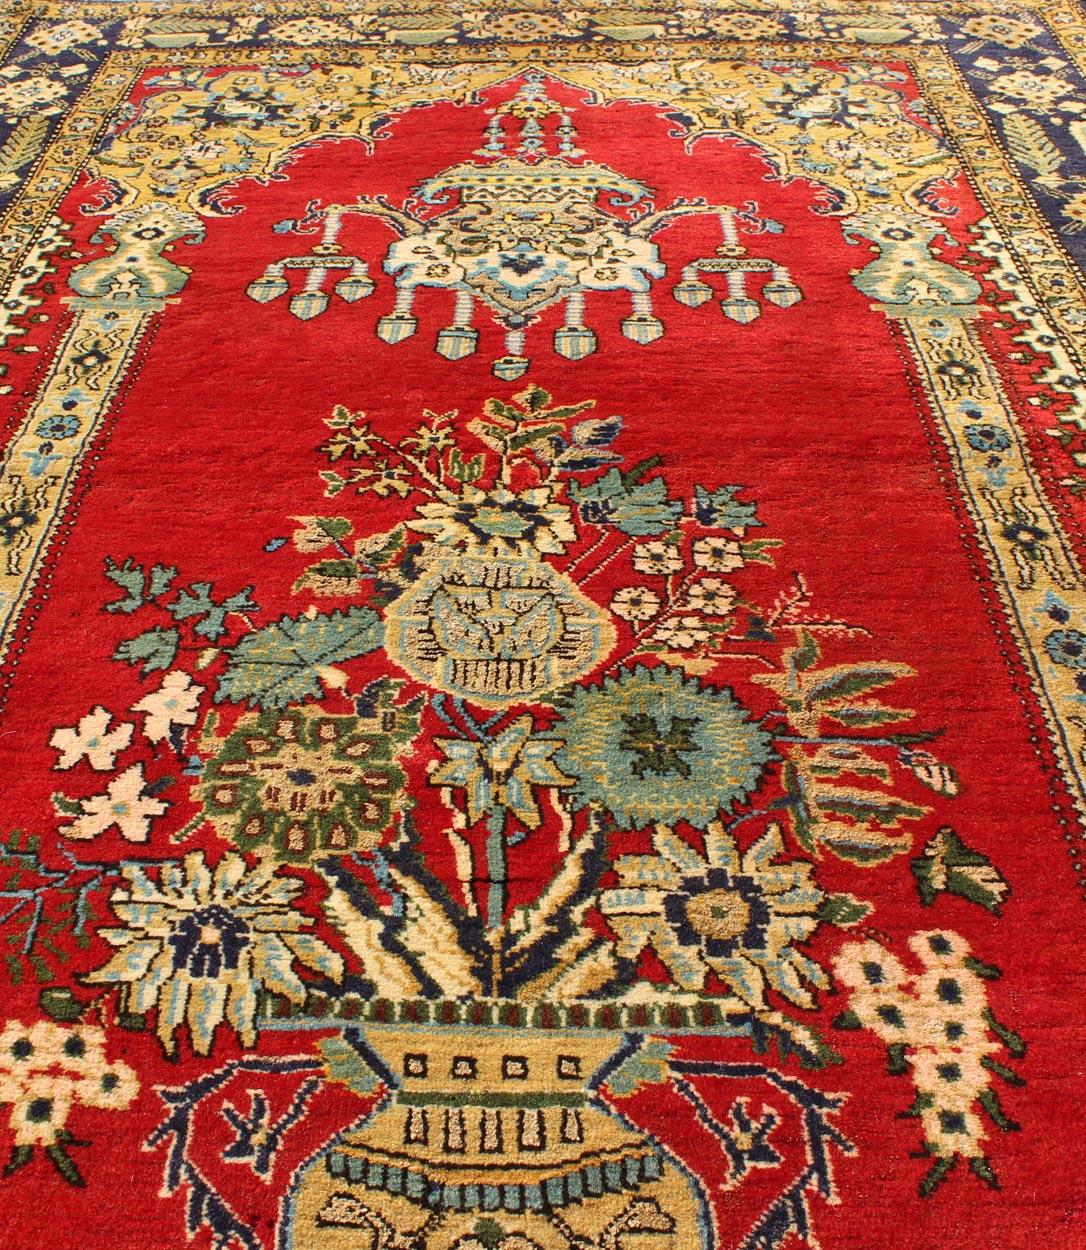 Vintage Persian Qum Prayer Rug in Bright Red with Floral Bouquet Chandelier 1